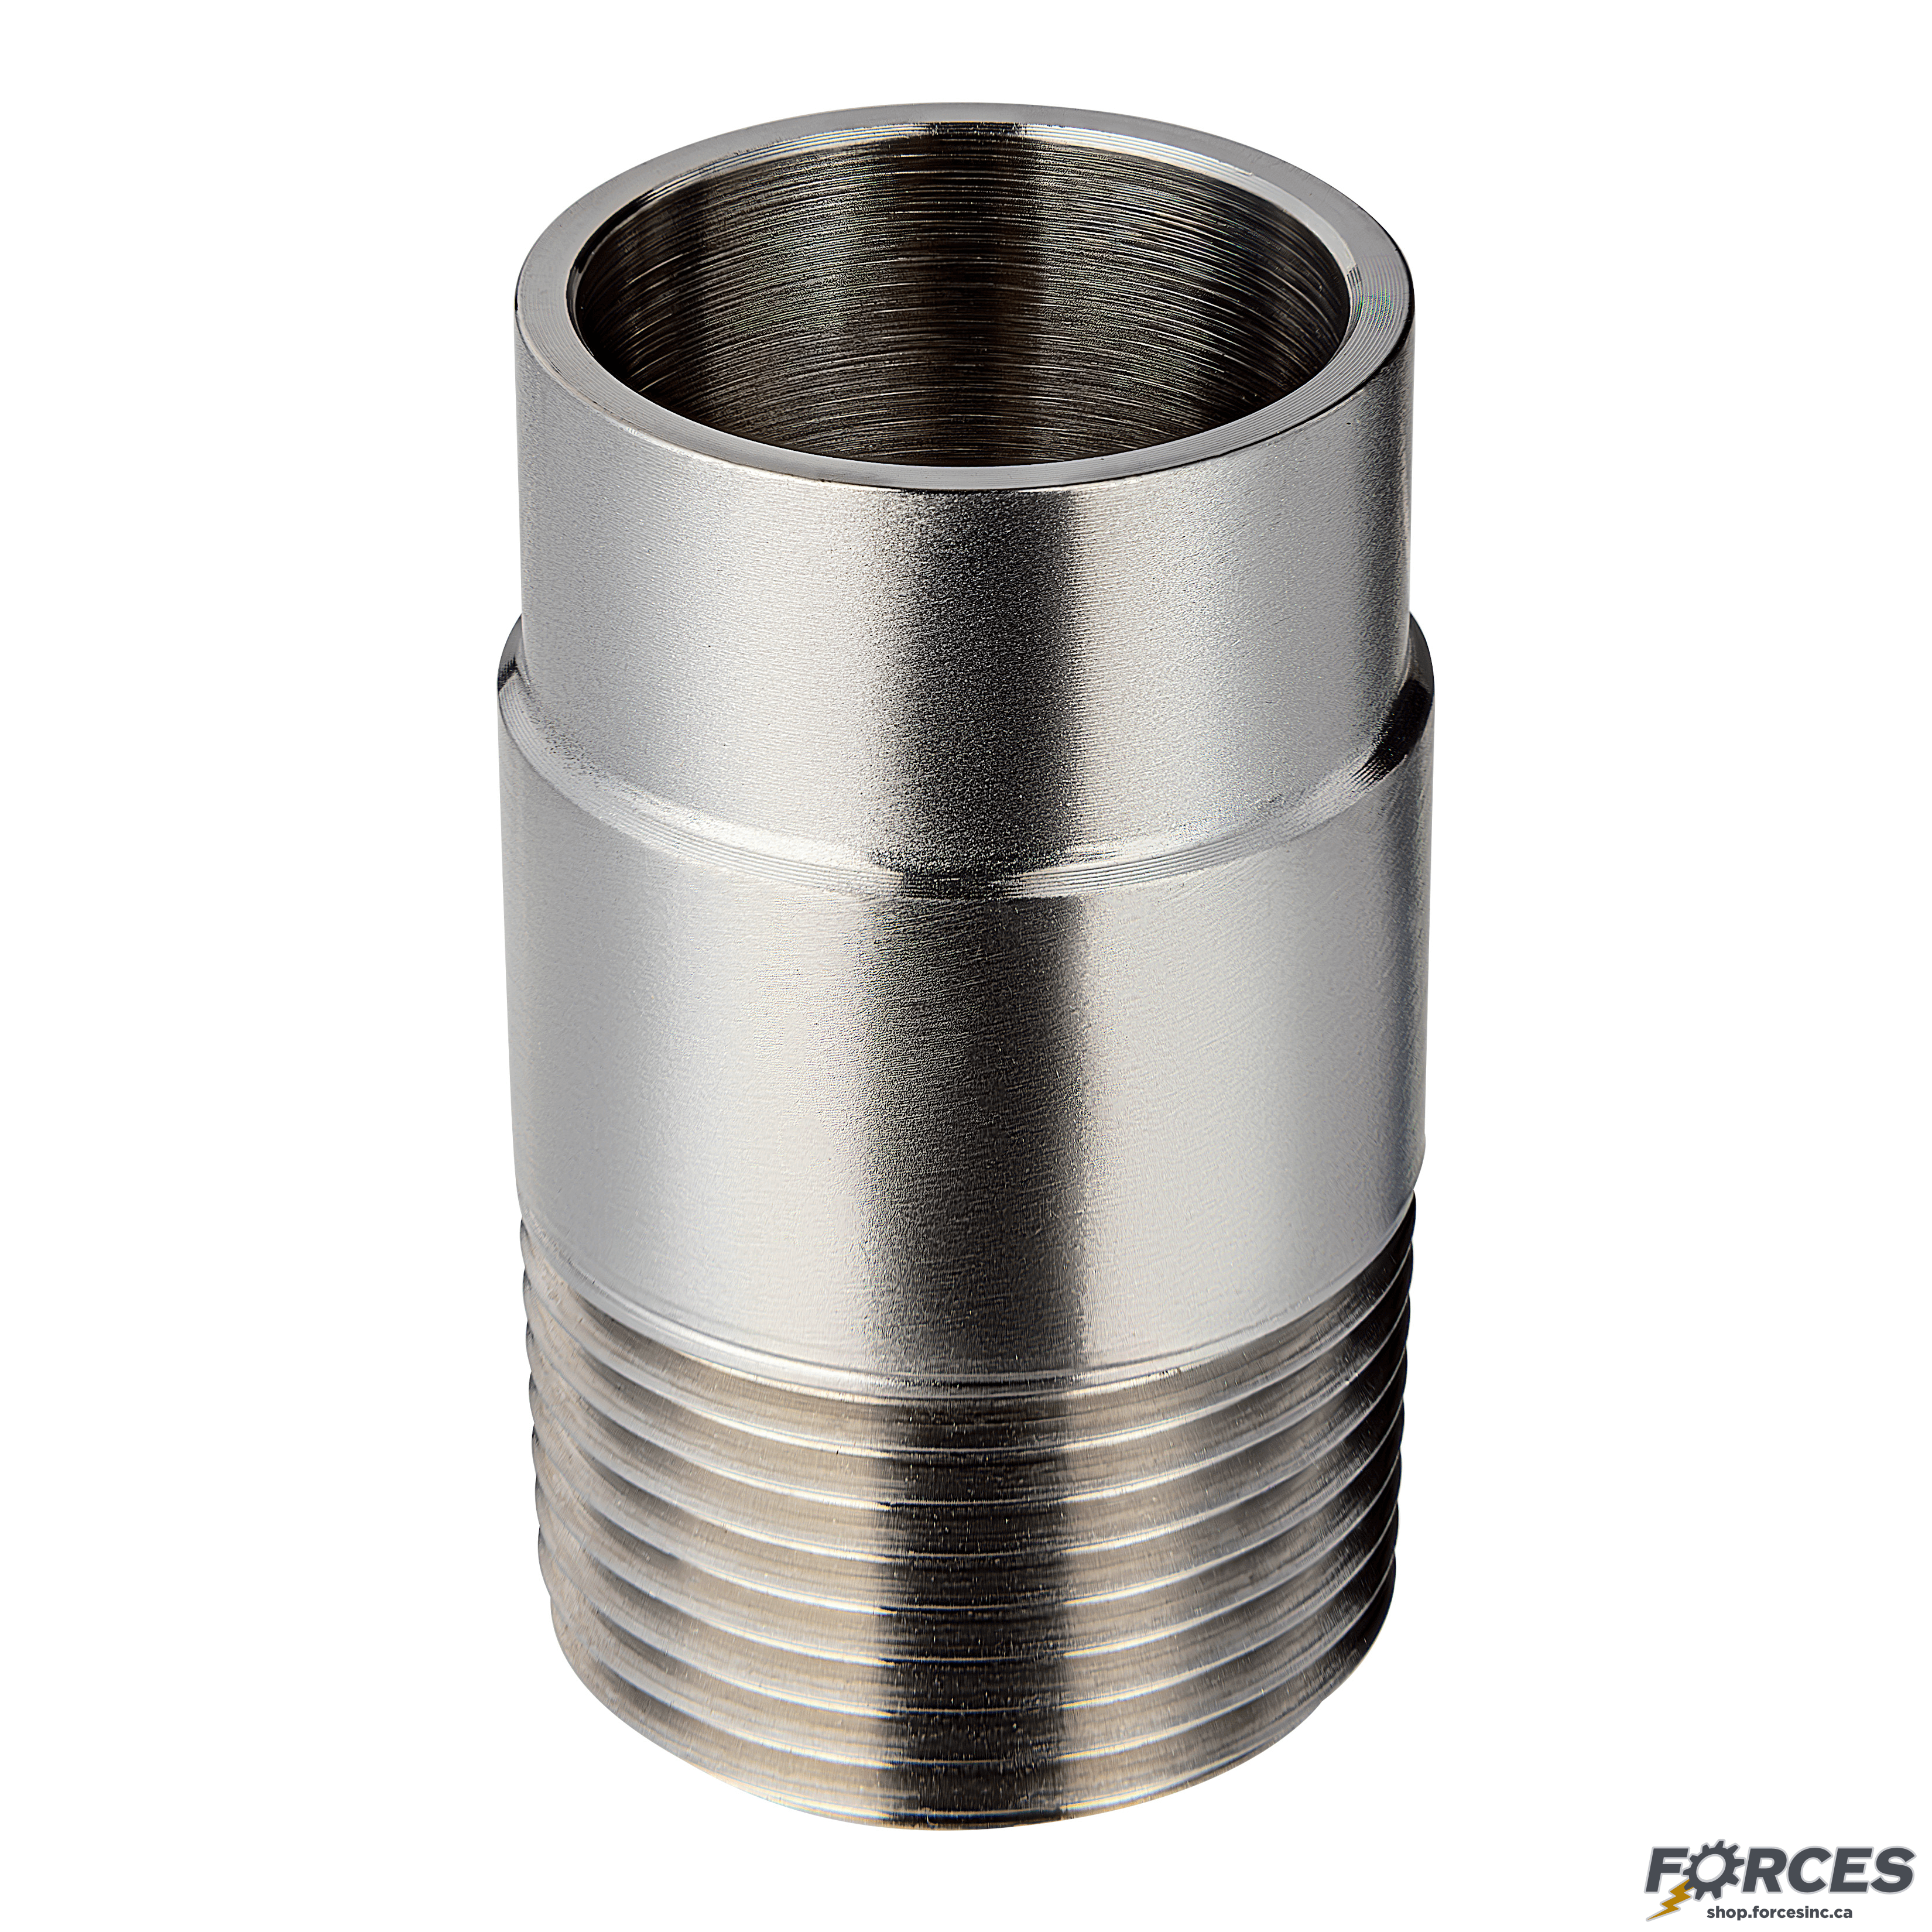 1" x 3/4" Butt Weld x Male NPT Adapter - Stainless Steel 316 - Forces Inc